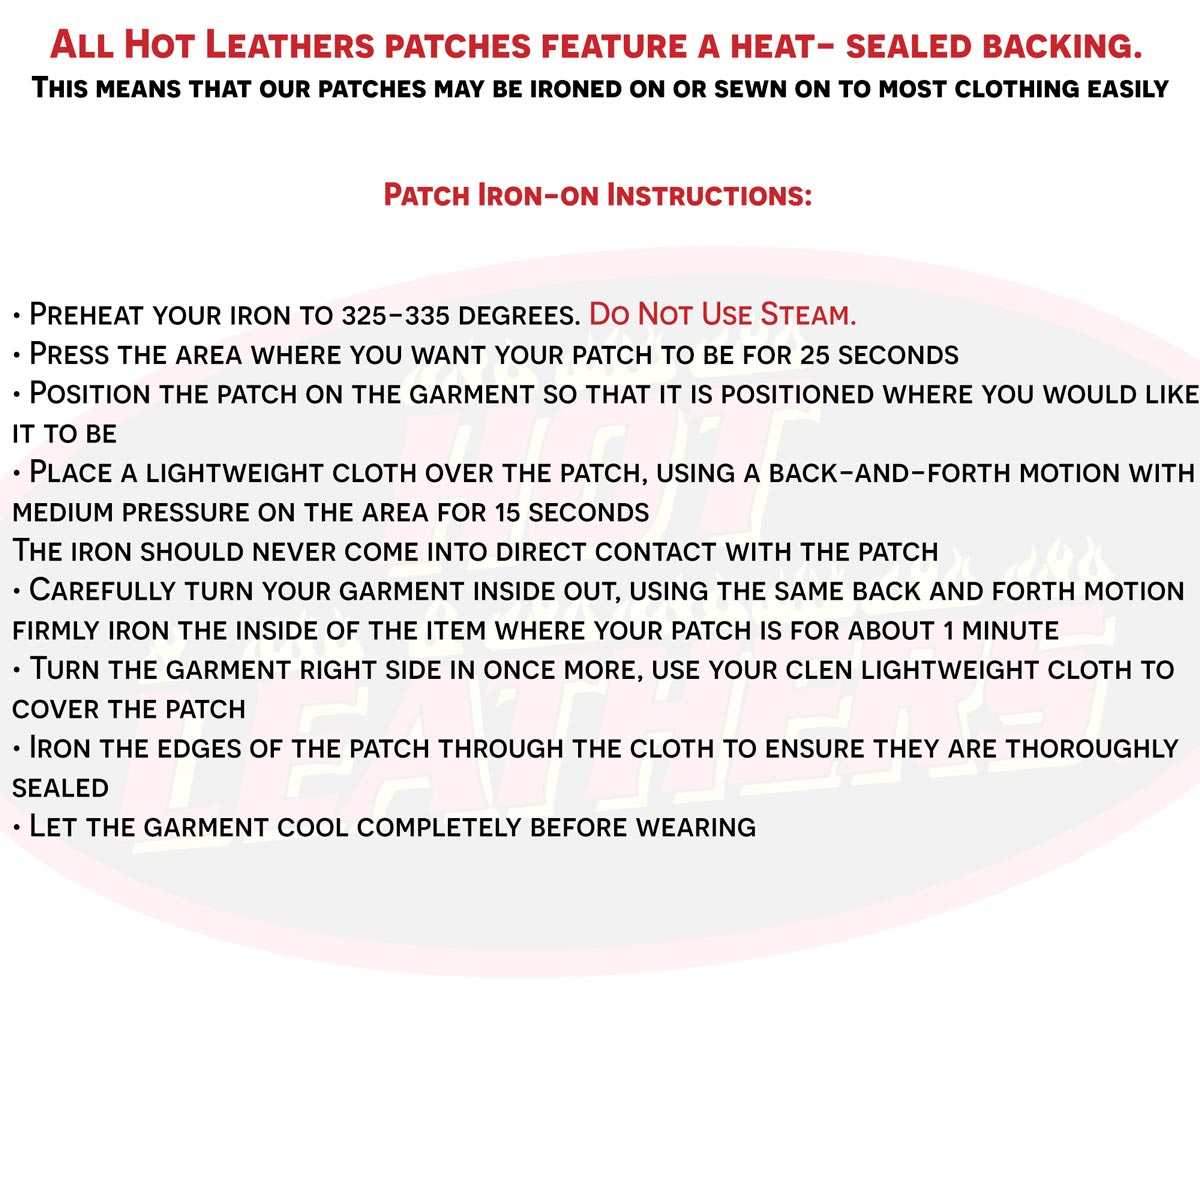 Hot Leathers F*** Around - Find Out 12” X 3” Top Rocker Patch PPM4167